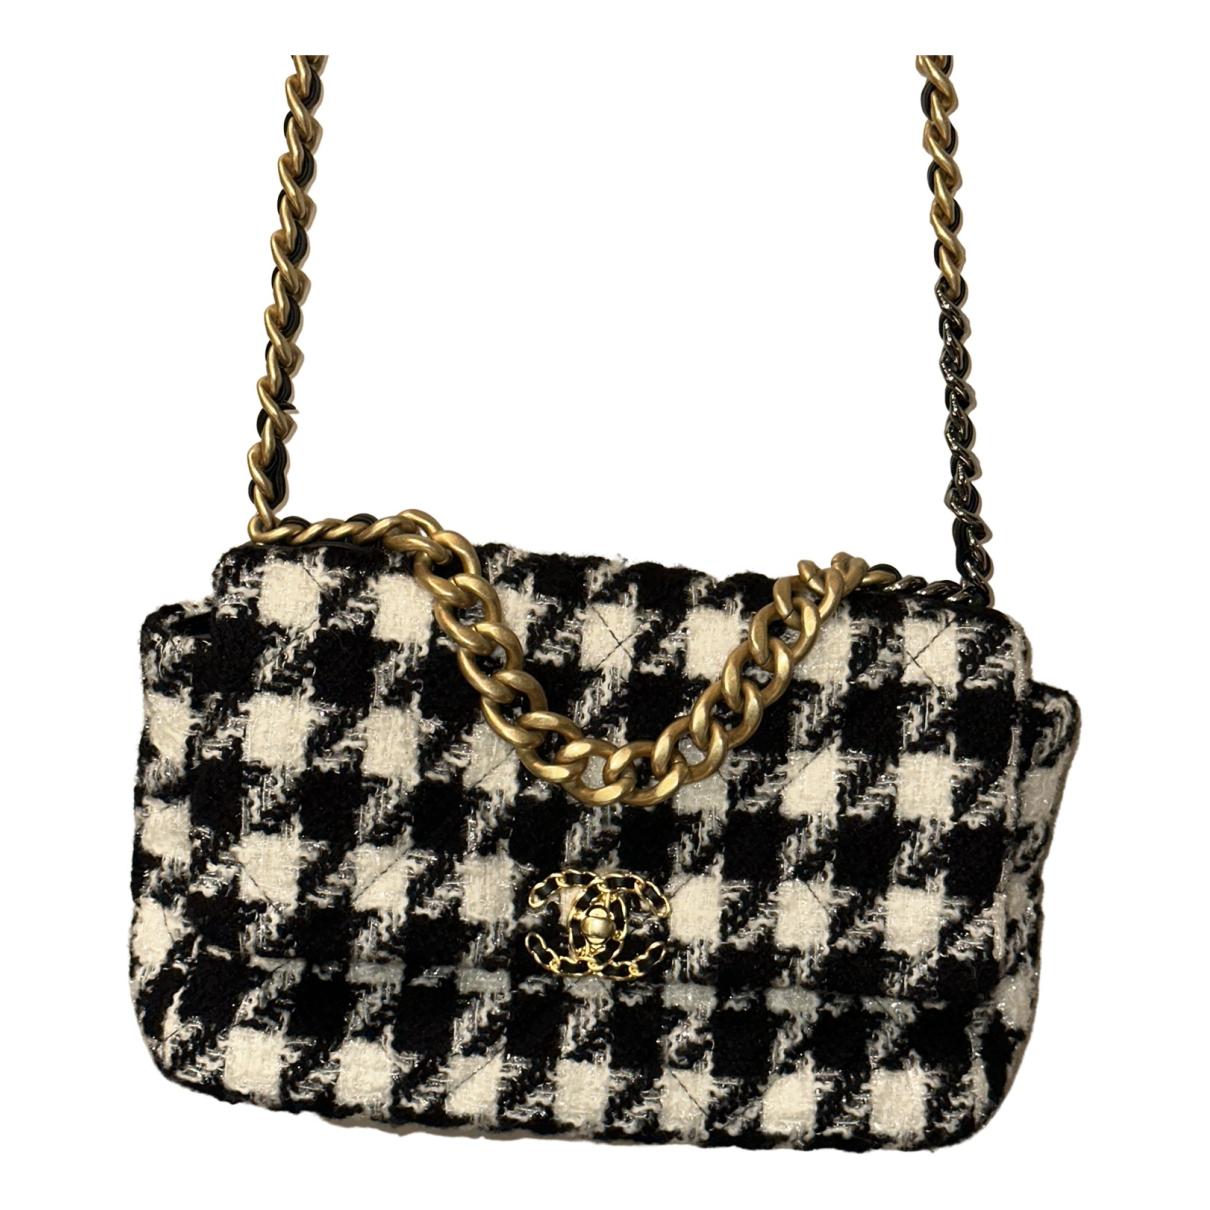 CHANEL CHANEL 19 Small Flap Bag in Black White Houndstooth Ribbon